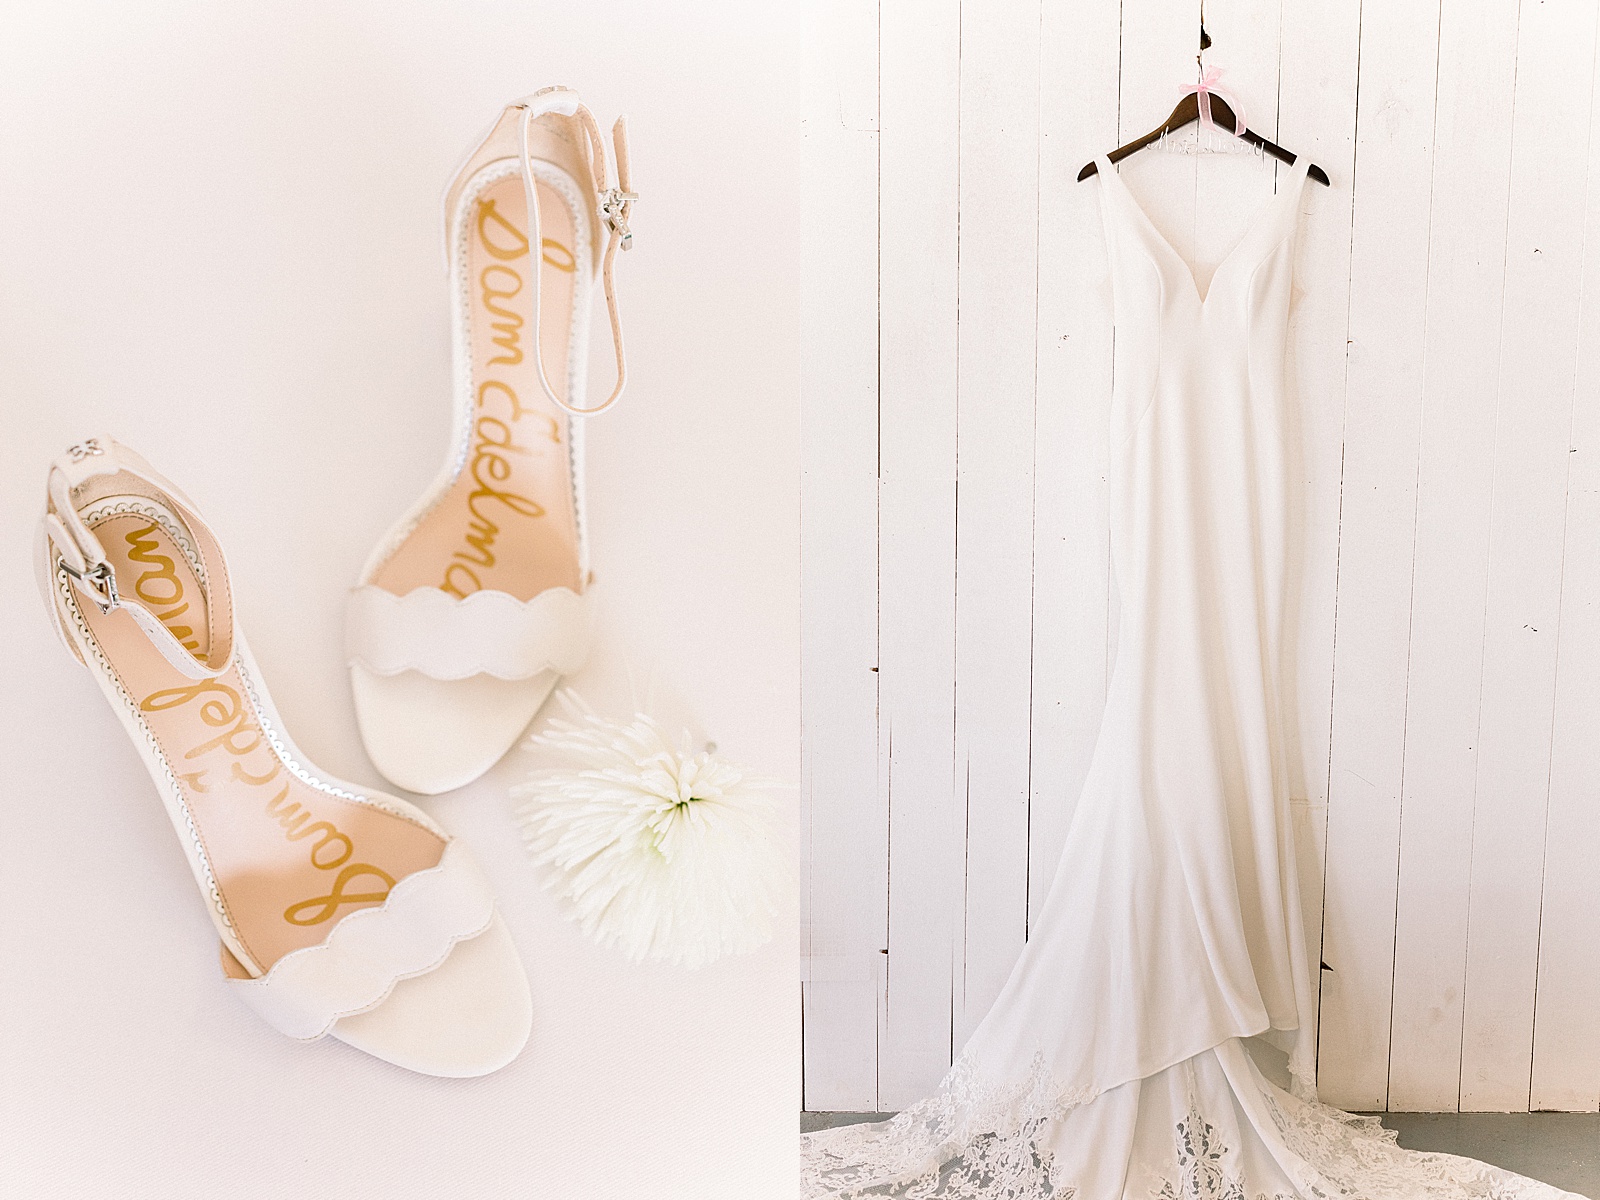 Bridal shoes and gown, Blissful Hill, San Antonio Wedding Photographer